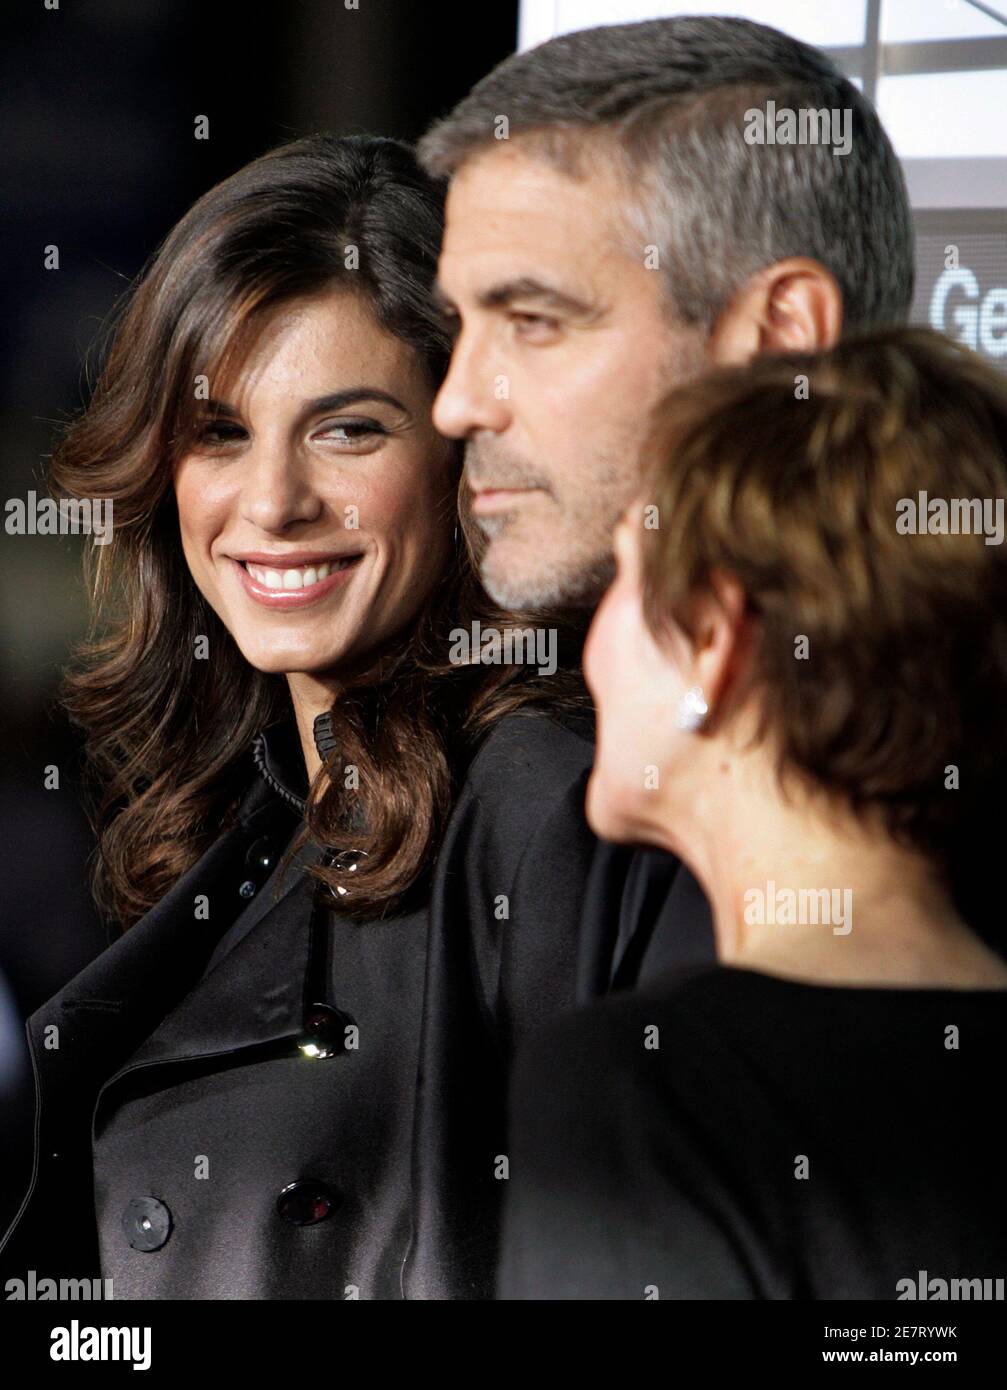 Actor George Clooney's girlfriend Elisabetta Canalis (L) poses with Clooney, star of the film 'Up In The Air' and his mother Nina Clooney at the film's premiere in Los Angeles, California November 30, 2009. REUTERS/Fred Prouser    (UNITED STATES ENTERTAINMENT) Stock Photo